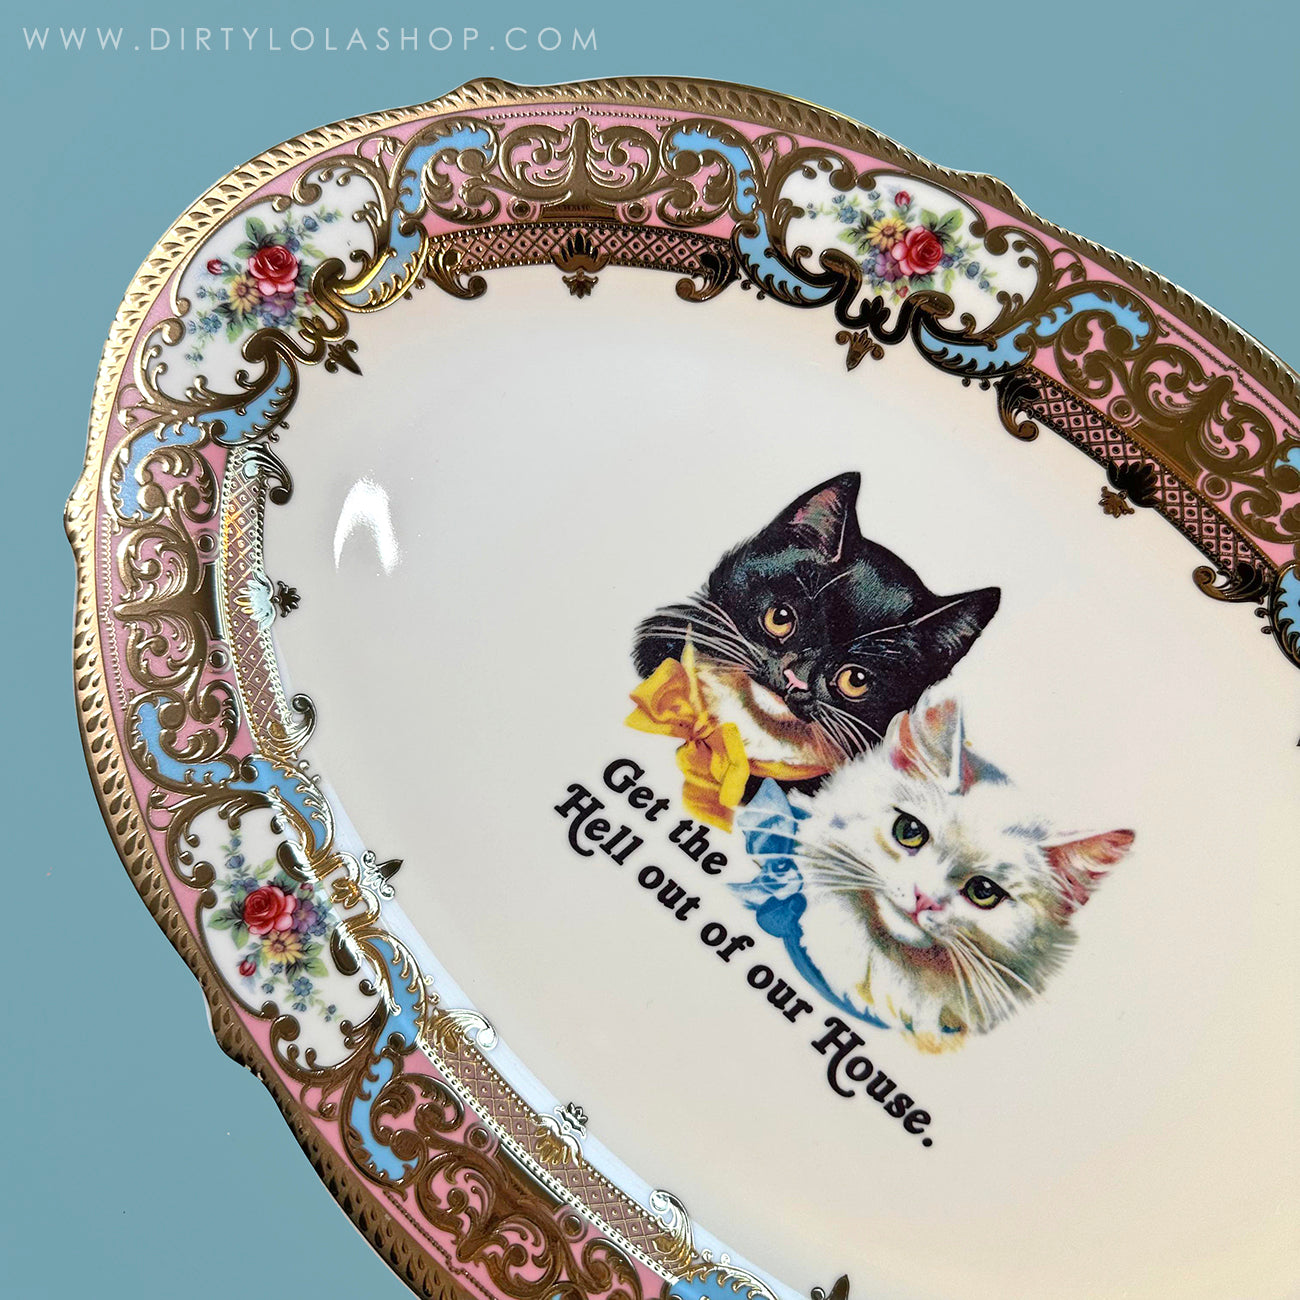 PRE-ORDER - NEW -  Antique Style Platter - "Get the Hell out of our House."